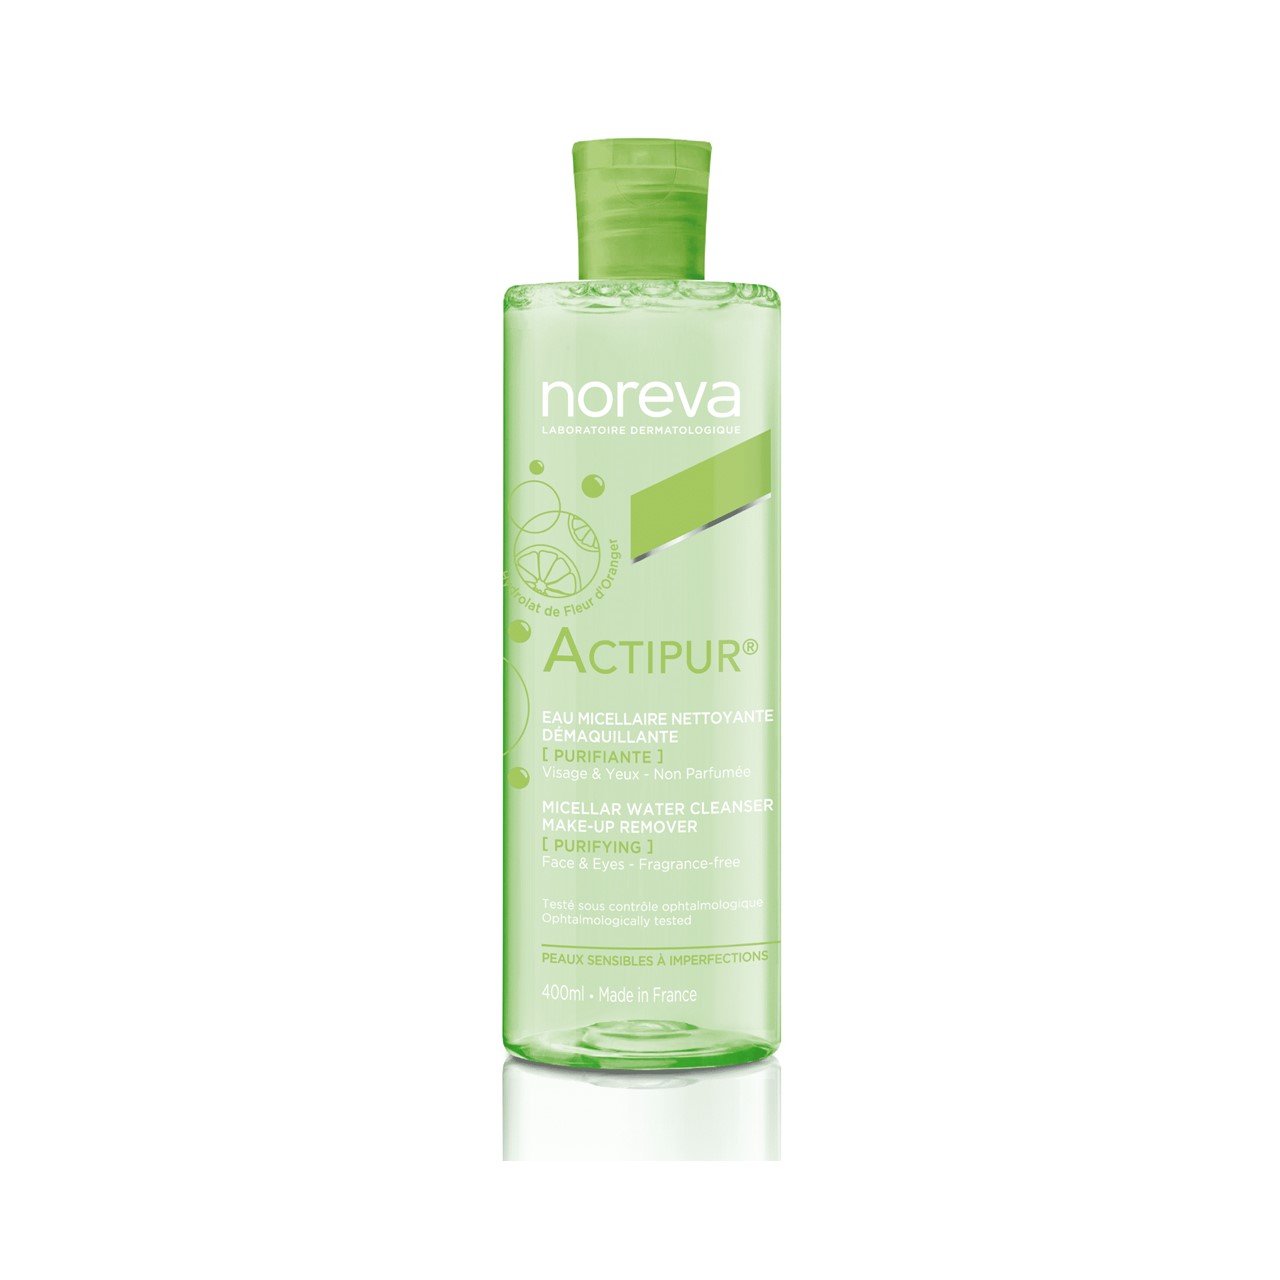 Noreva Actipur Micellar Water Cleanser Make-Up Remover 400ml